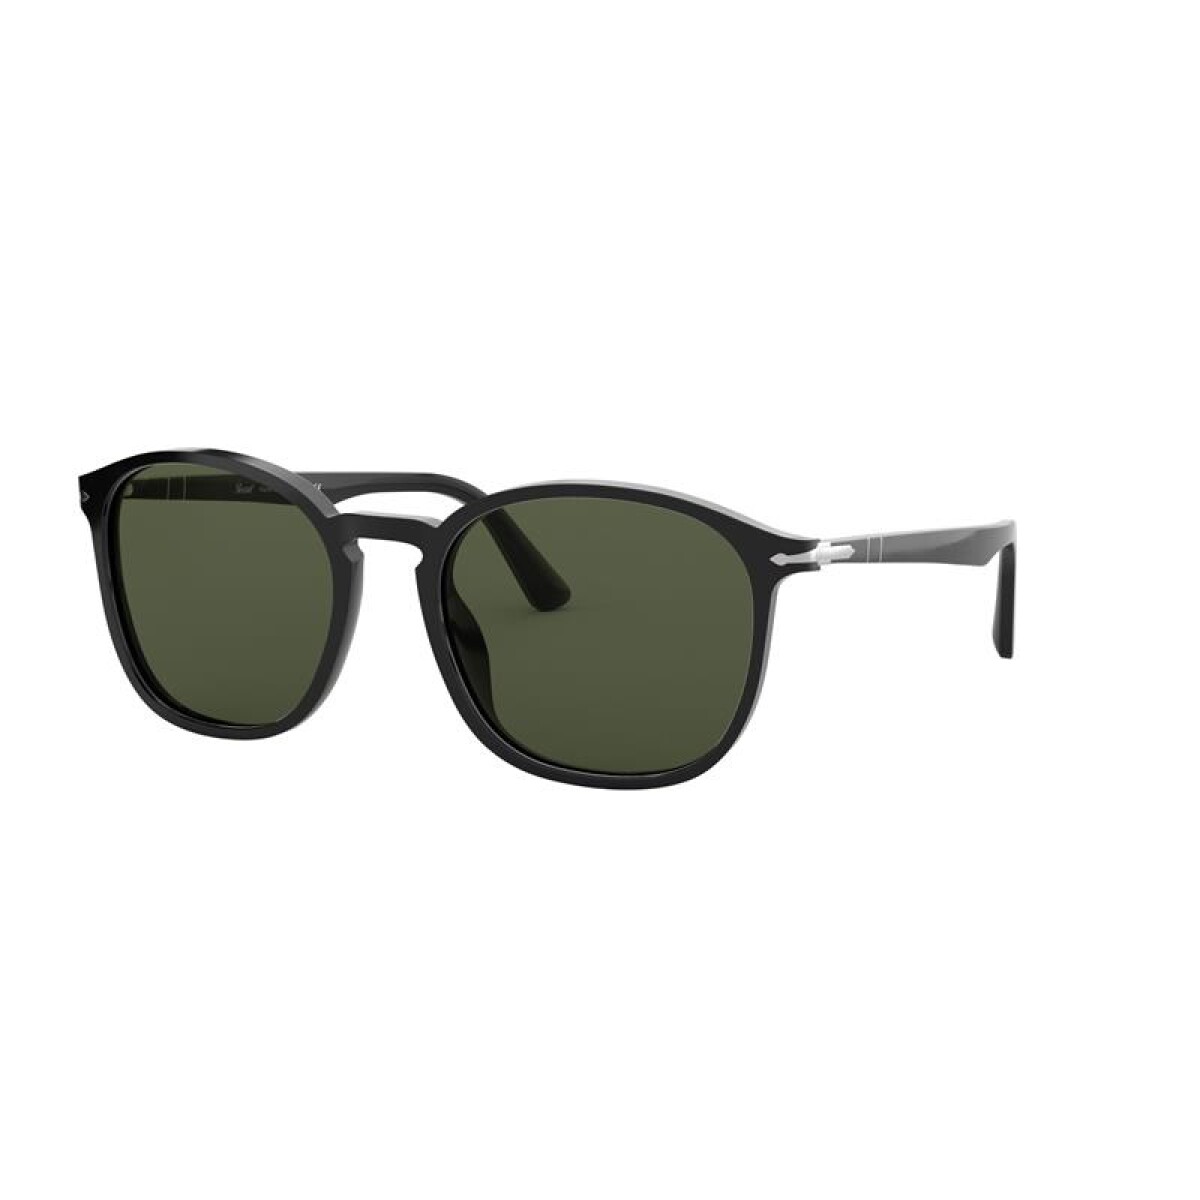 Persol 3215-s - 95/31 